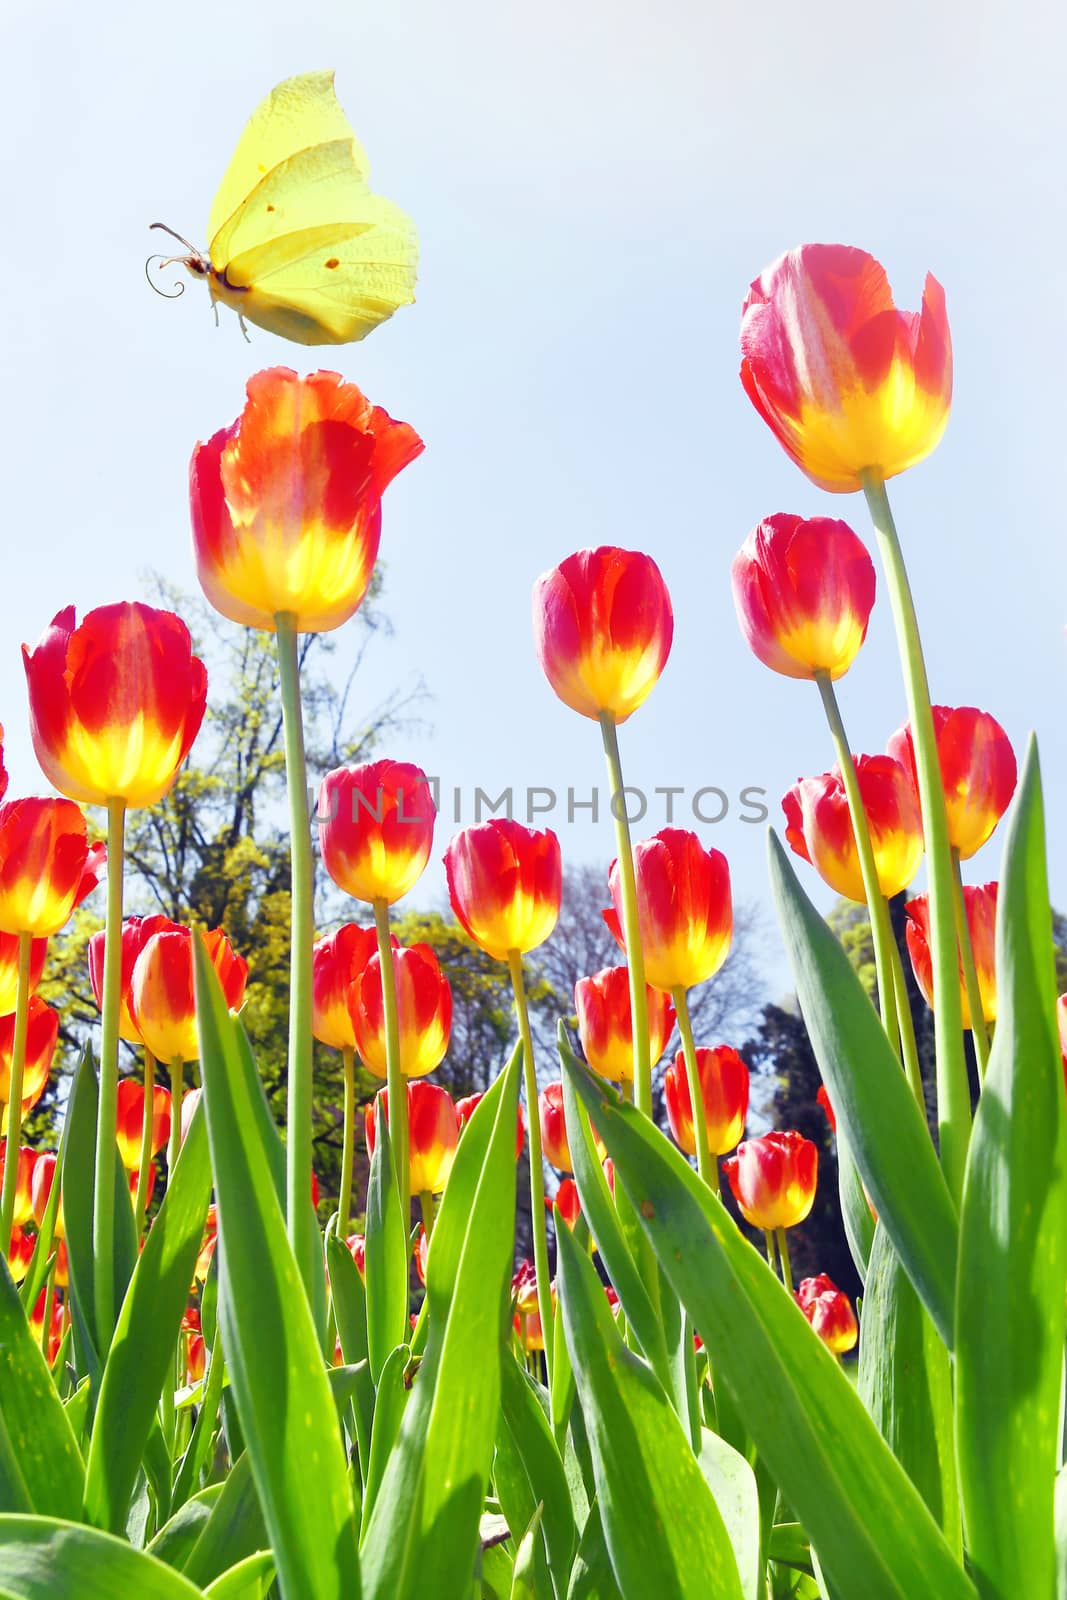 Tulips in the flowerbed. by bongia